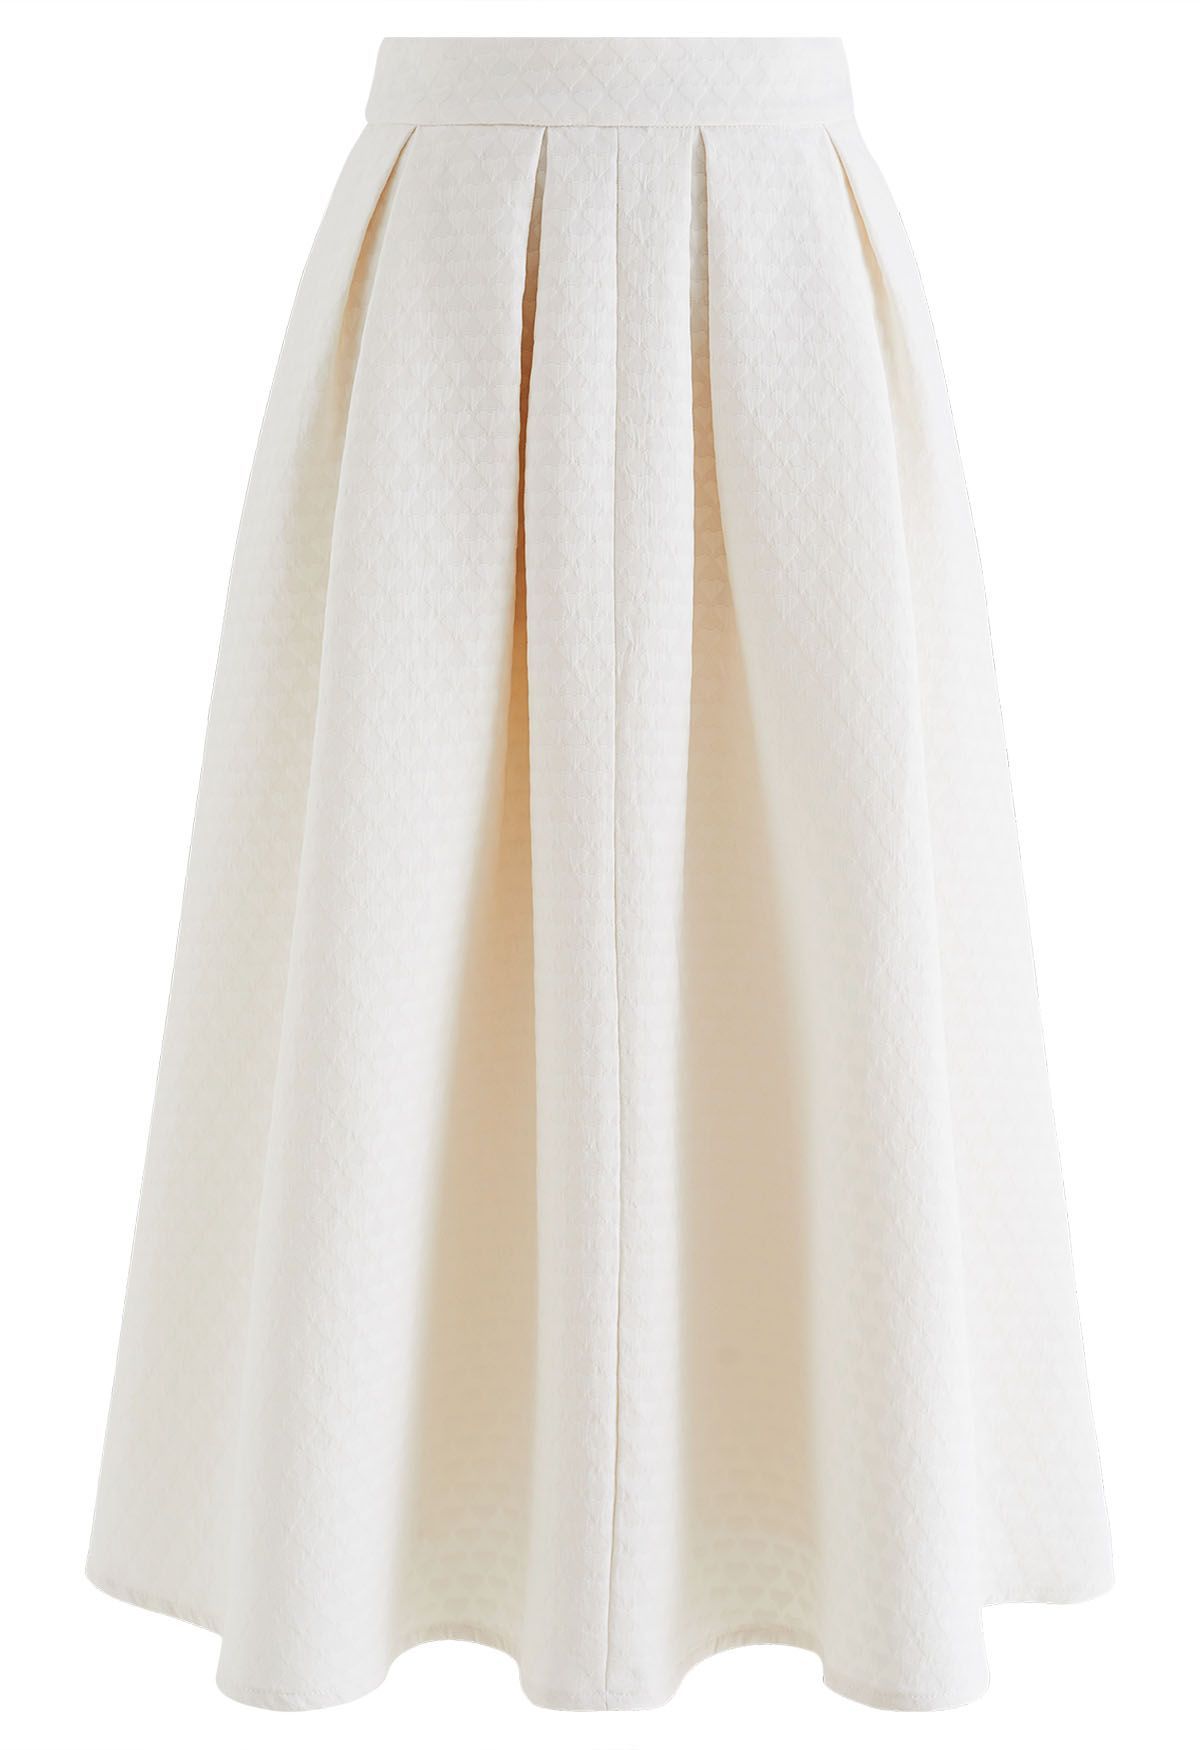 Embossed Heart Texture Pleated Midi Skirt in Ivory | Chicwish